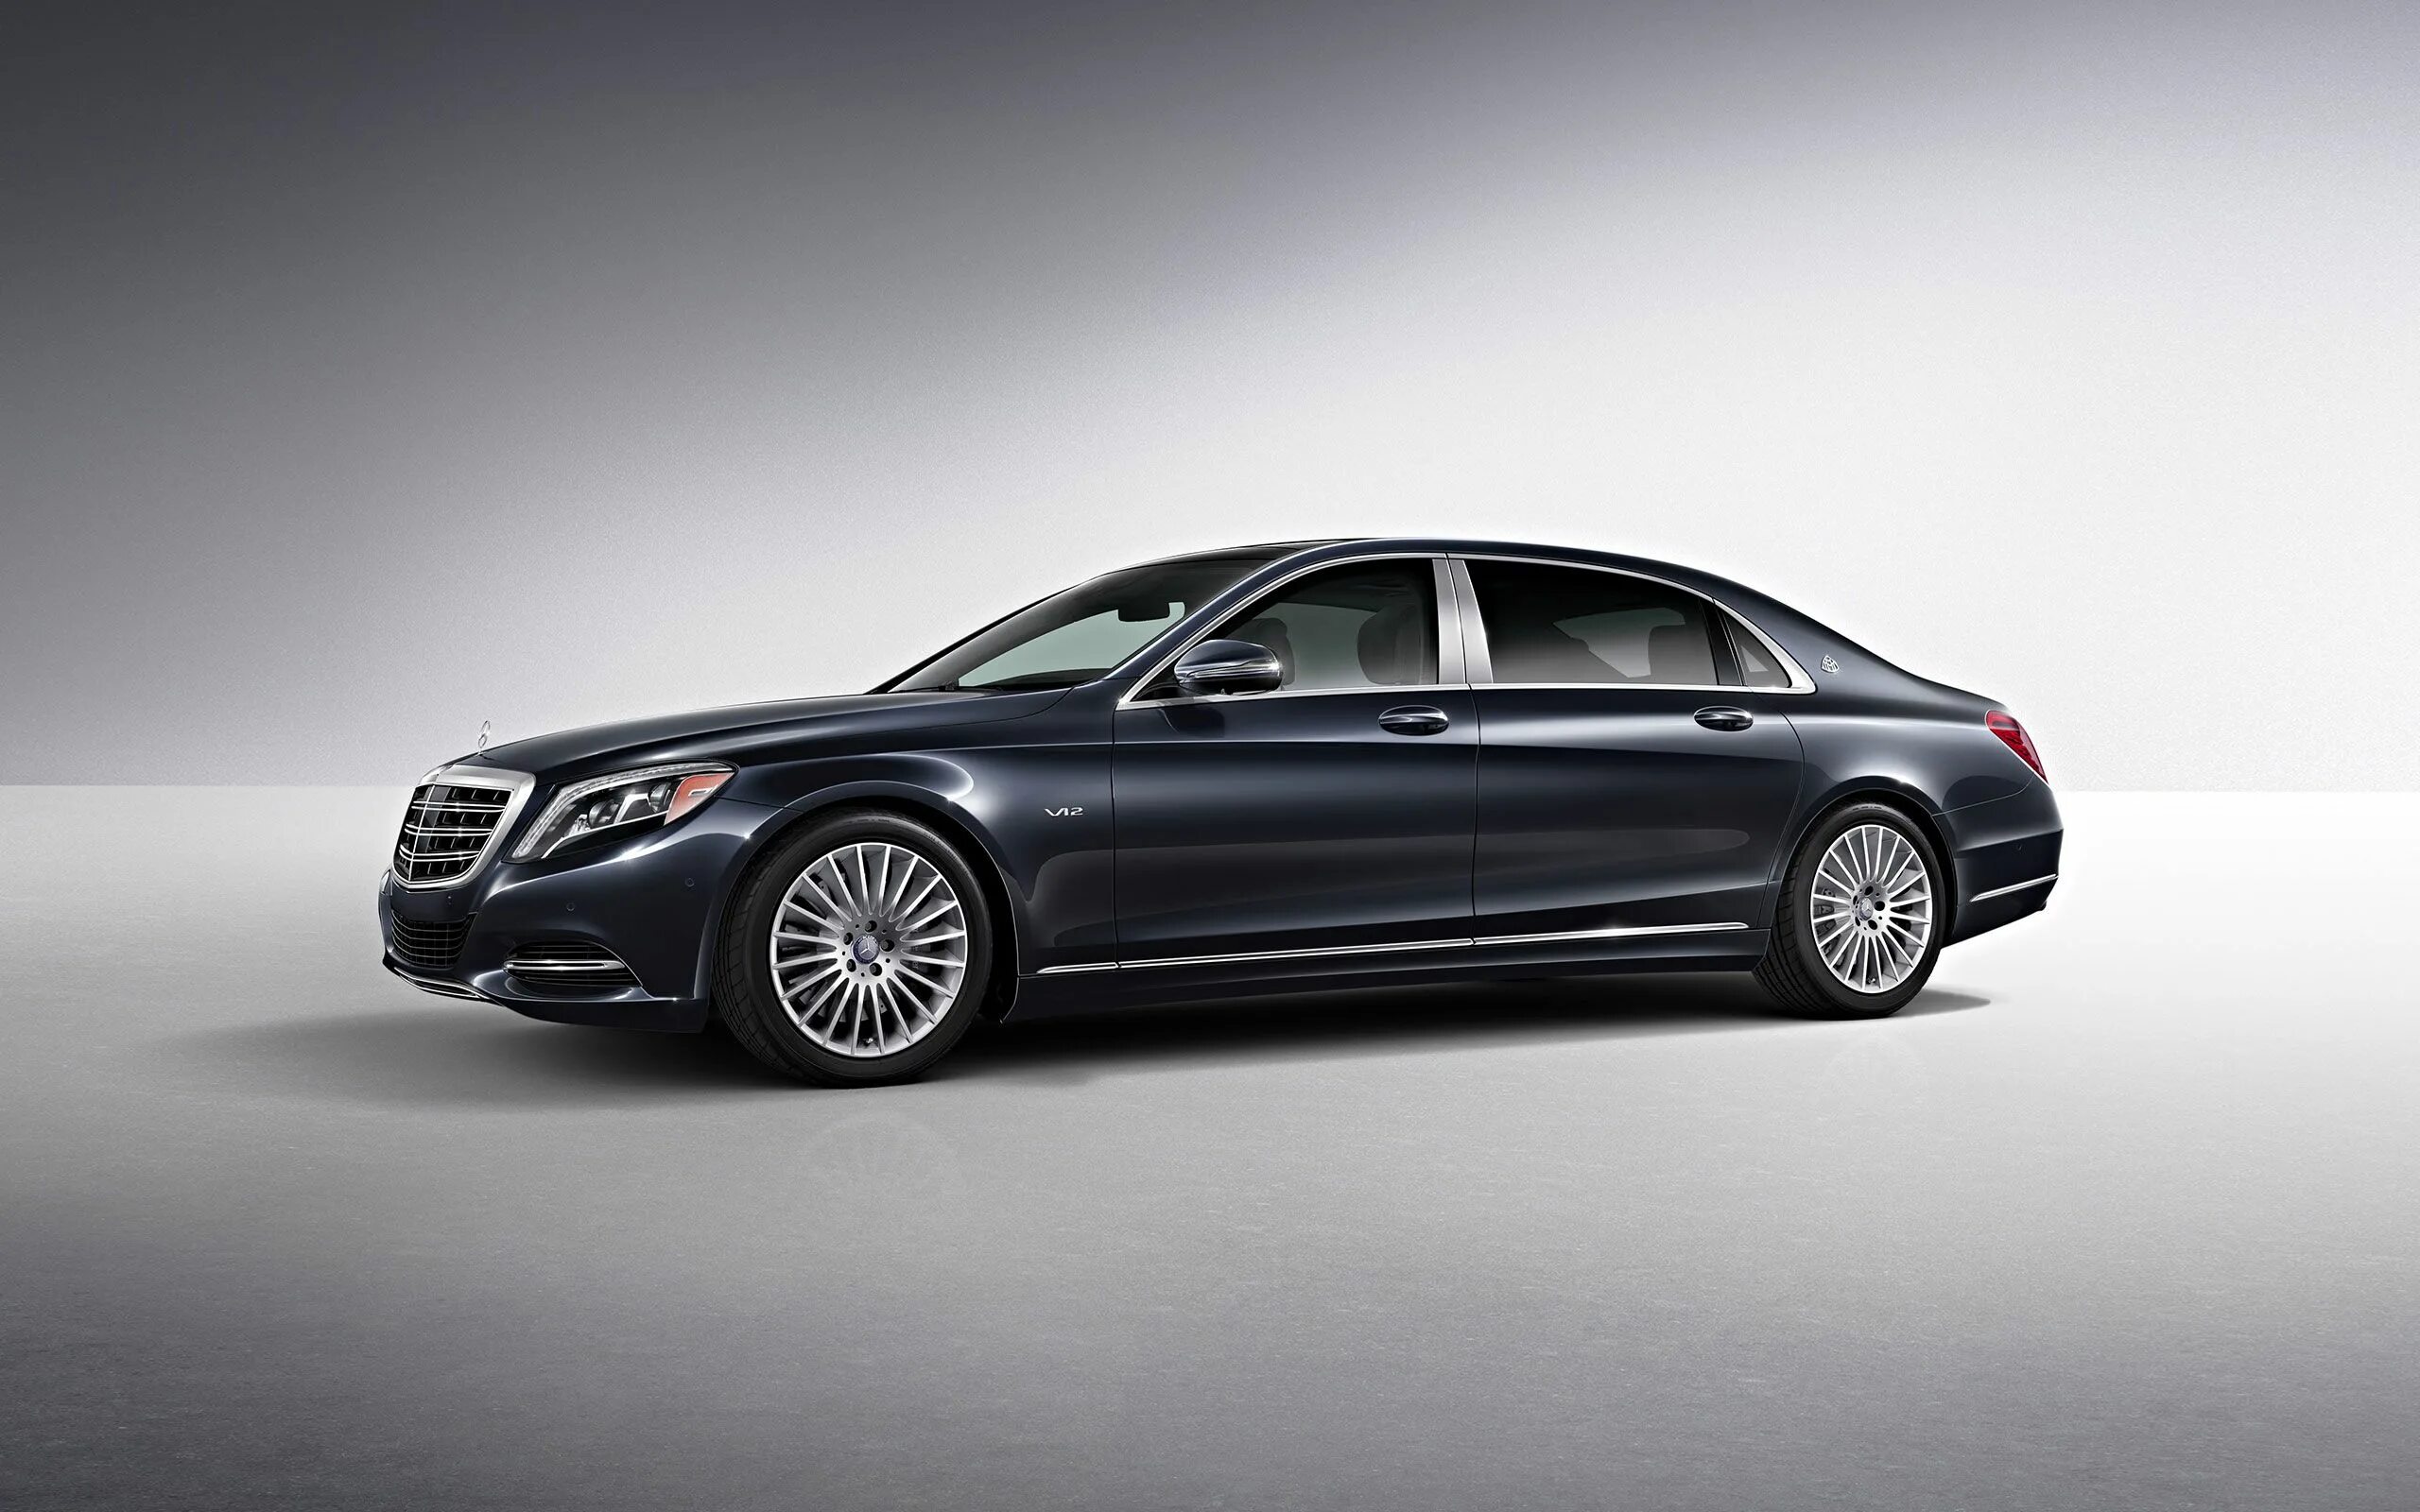 Mercedes Maybach s600. Mercedes s class Maybach s600. Мерседес Майбах 600. Мерседес Бенц Майбах s класс 600.